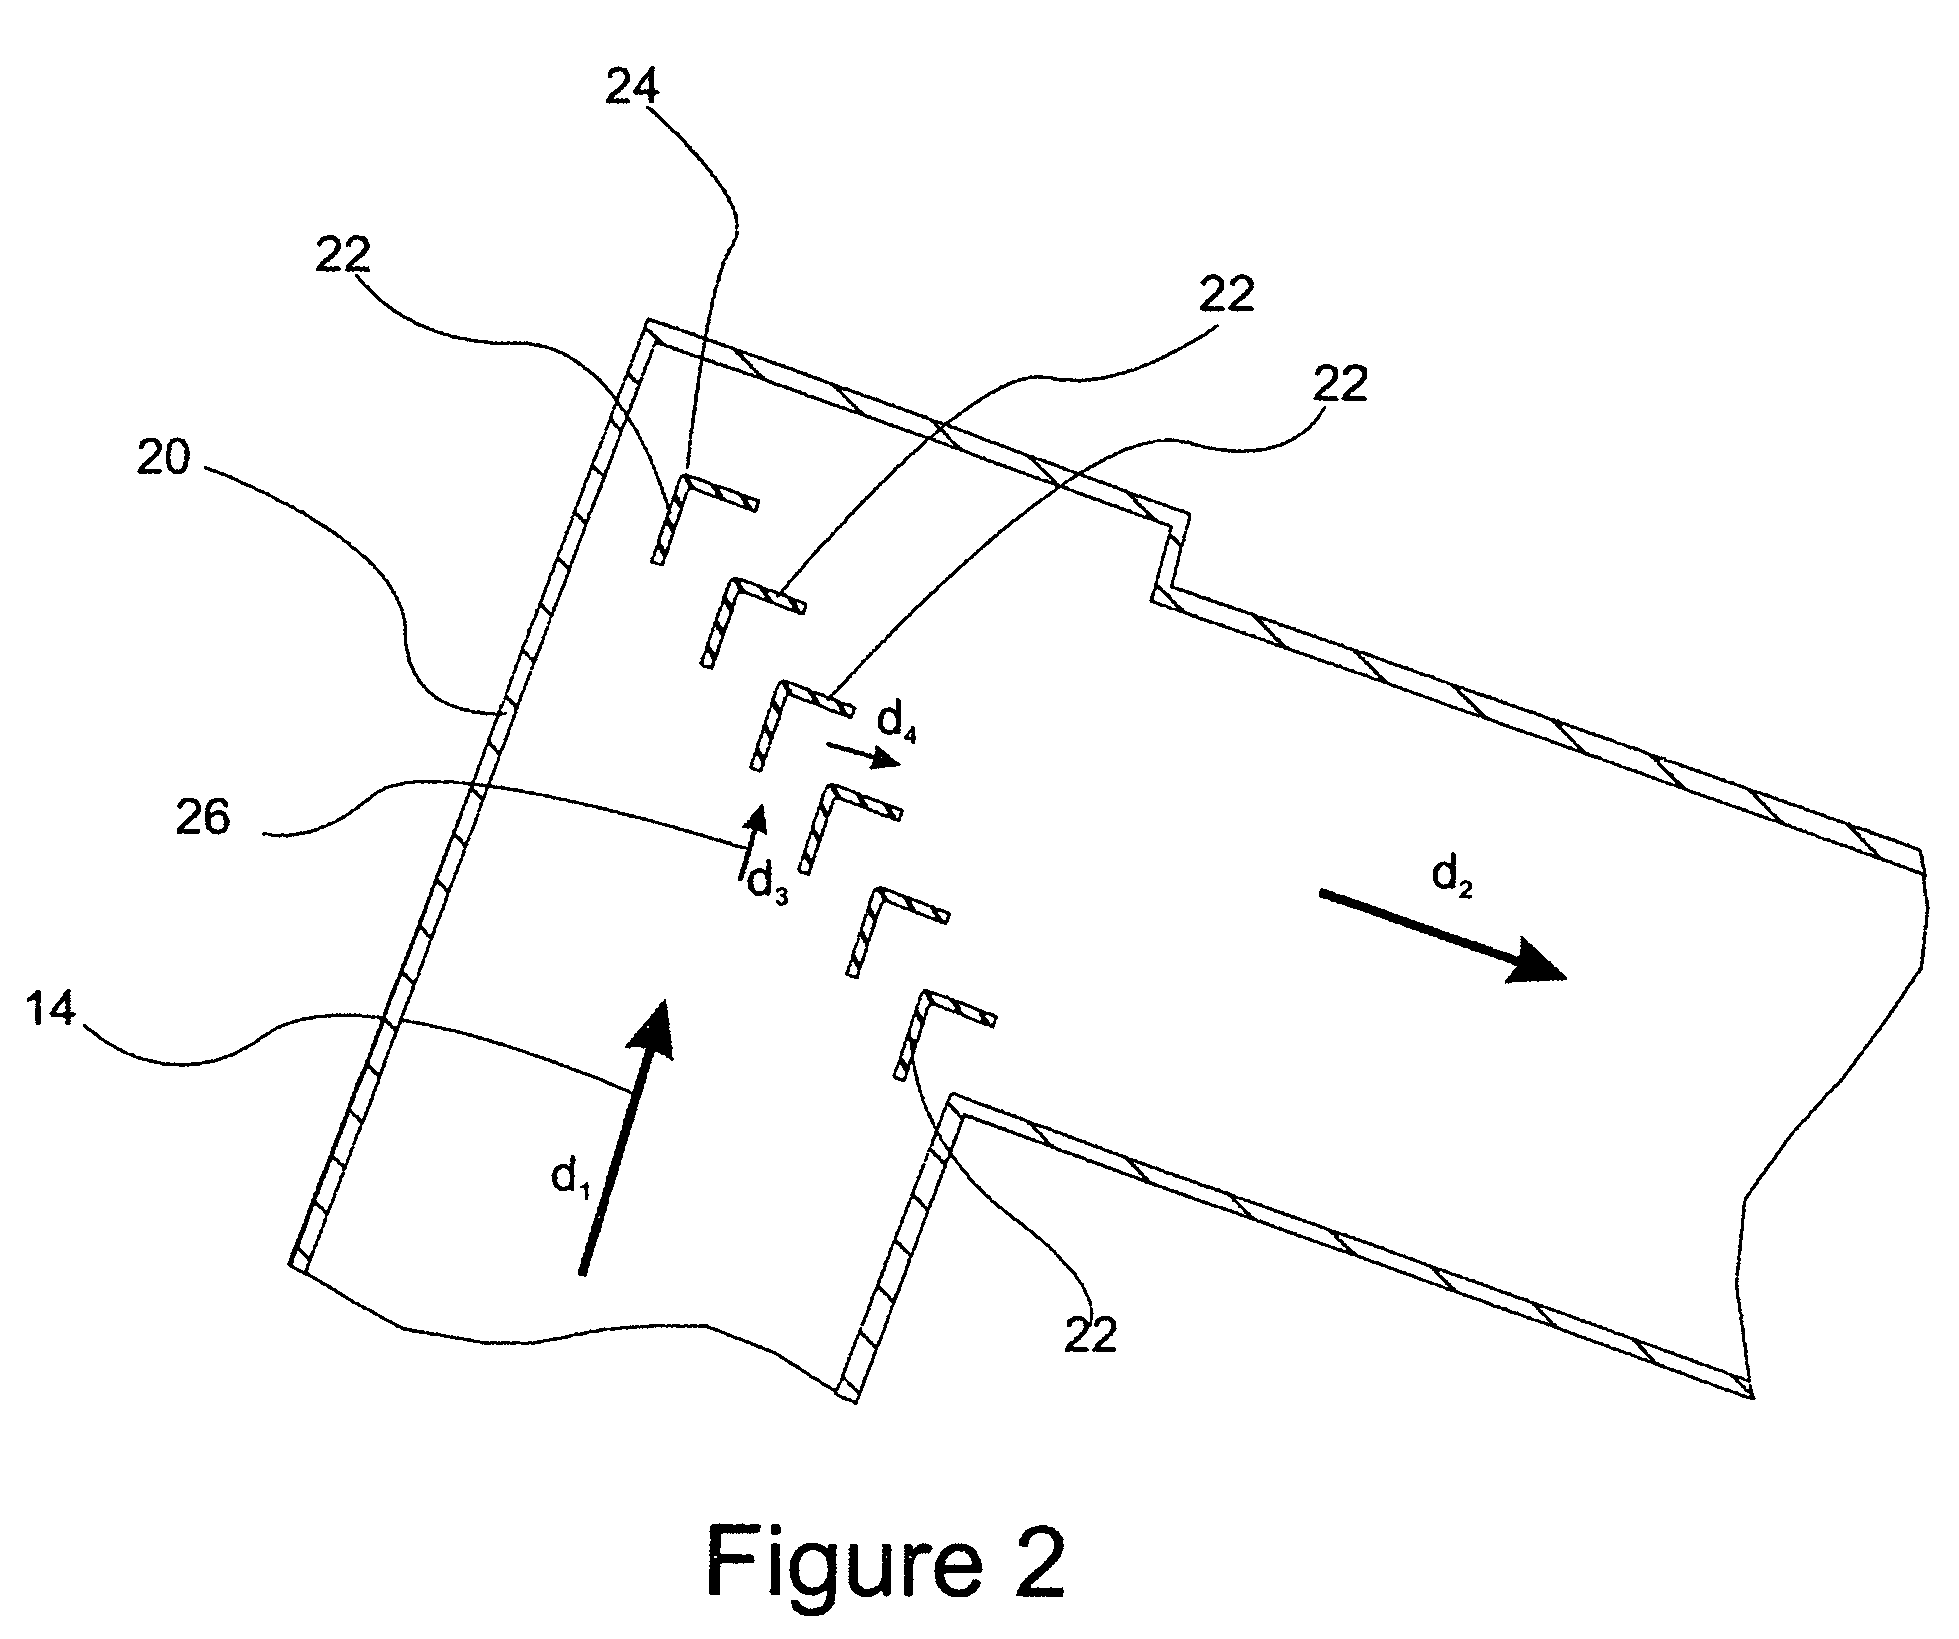 Gas-liquid separator utilizing turning vanes to capture liquid droplets as well as redirect the gas flow around a bend